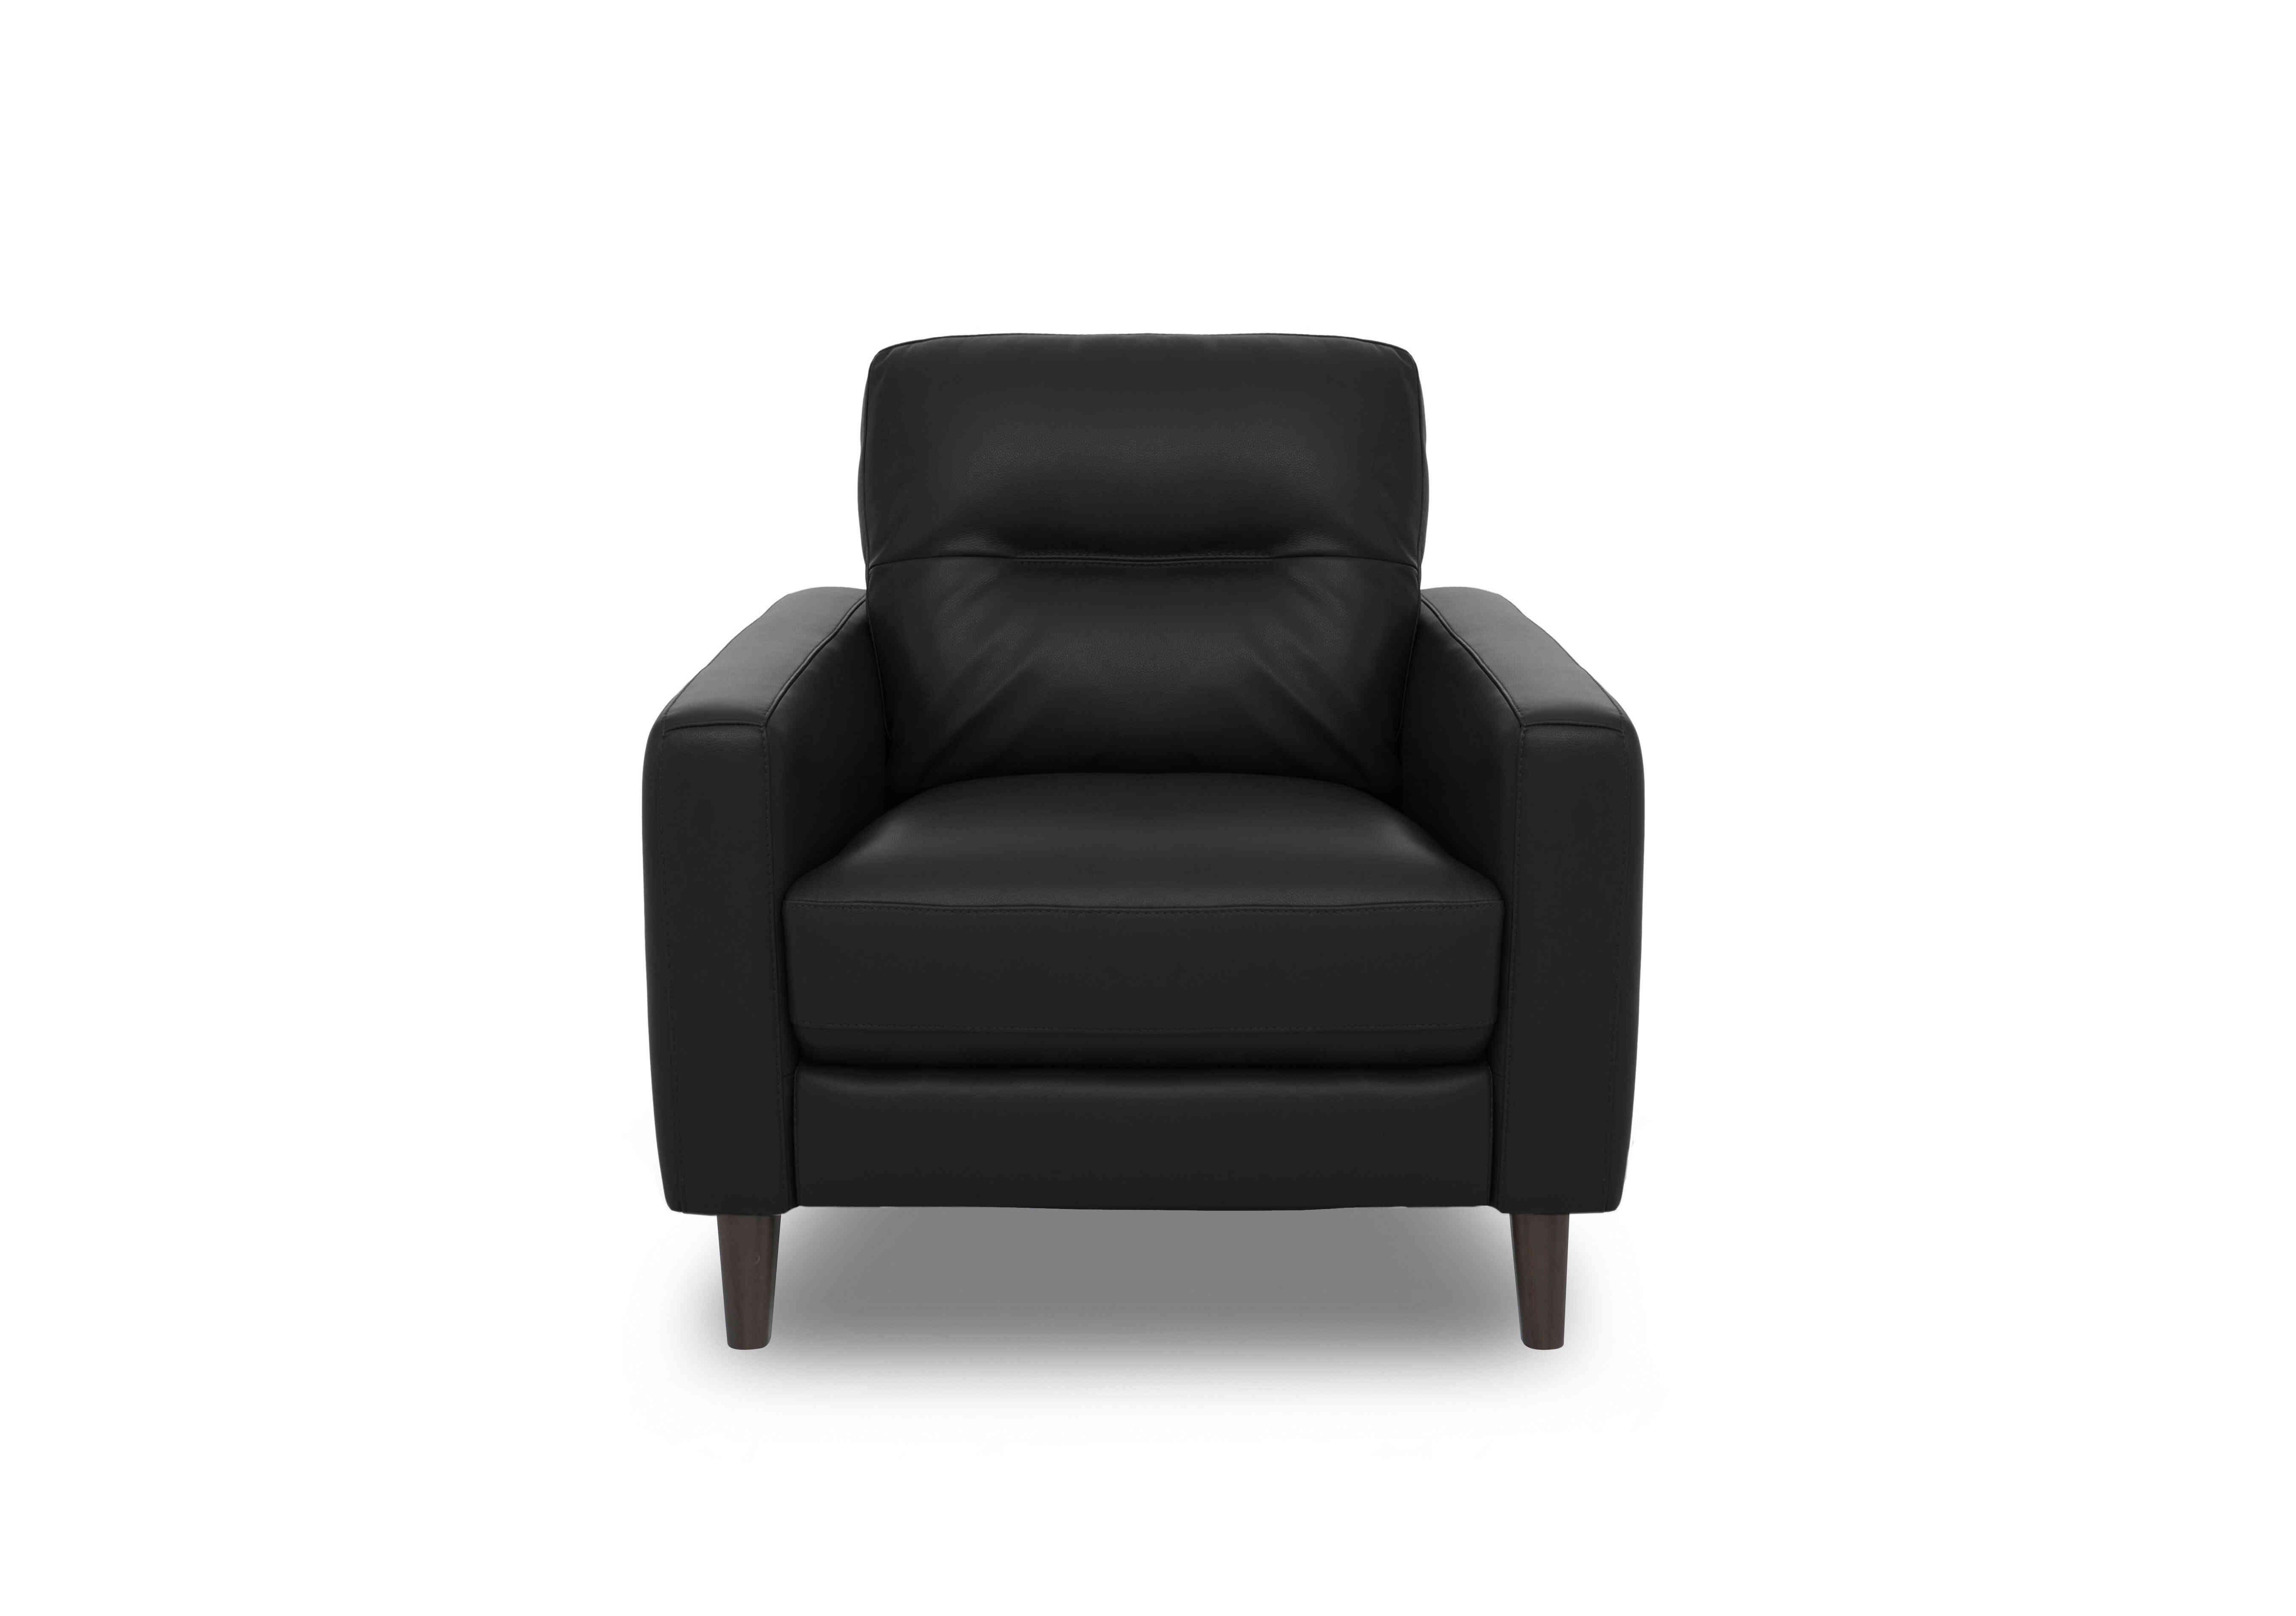 Jules Leather Chair in An-671b Black on Furniture Village